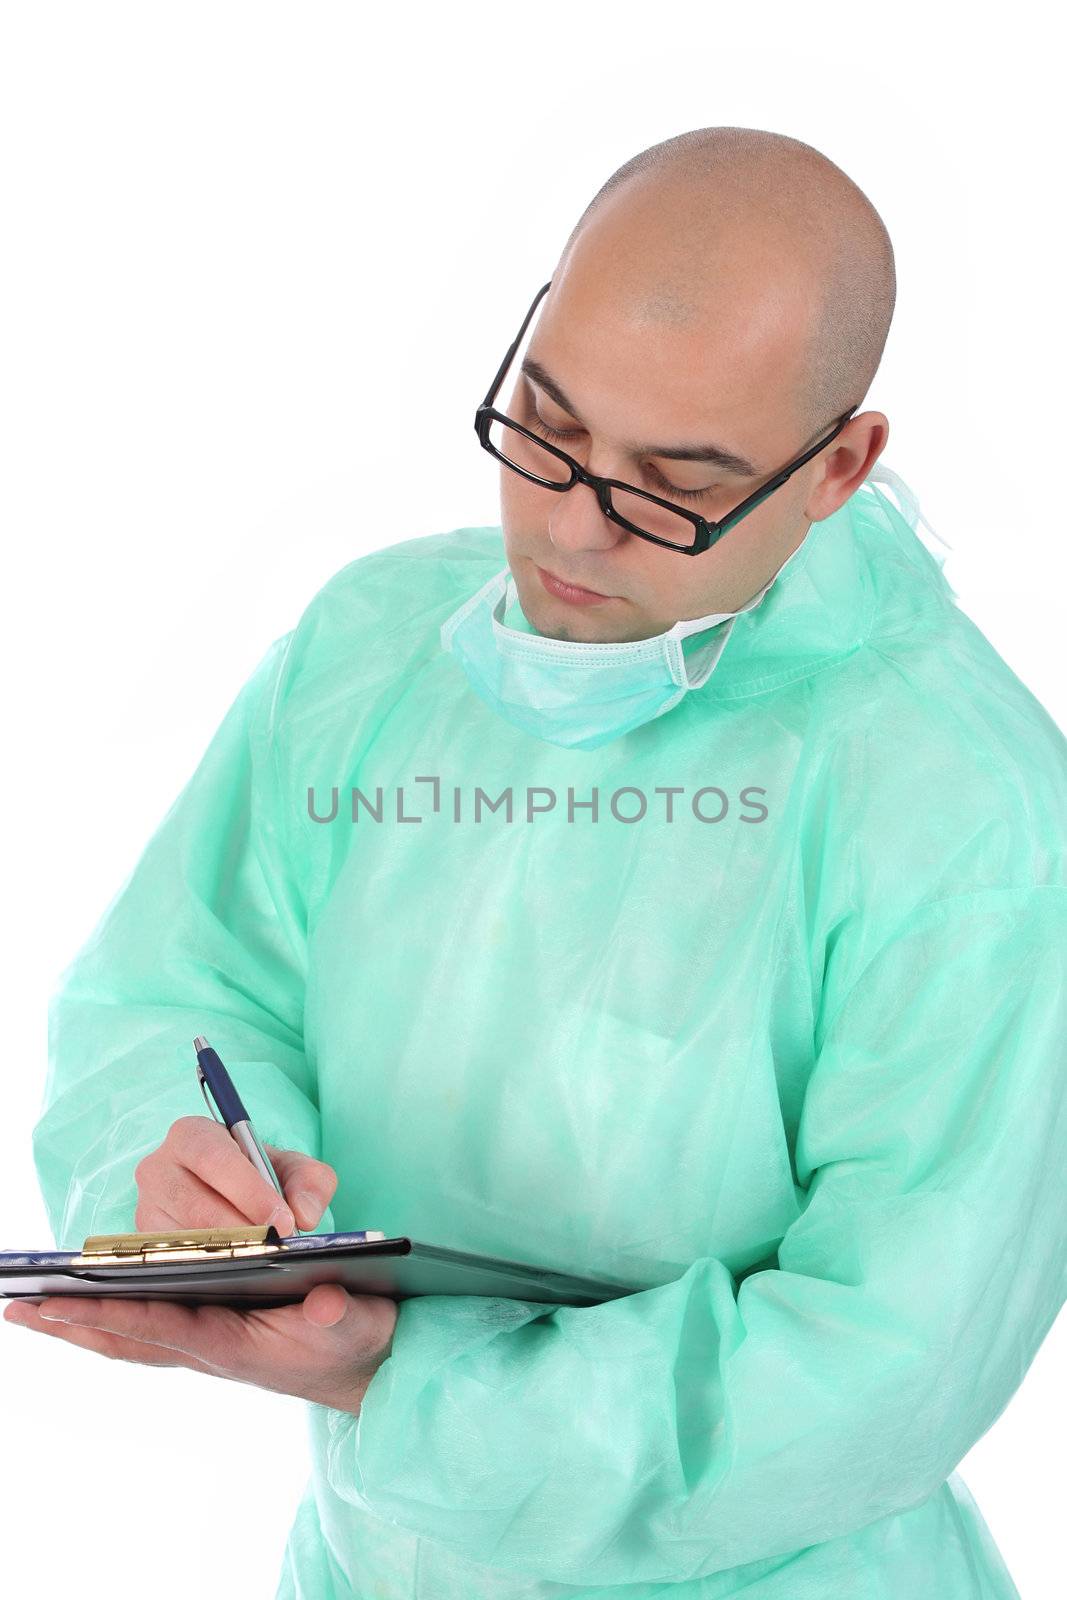 Details an surgeon with documents and pencil